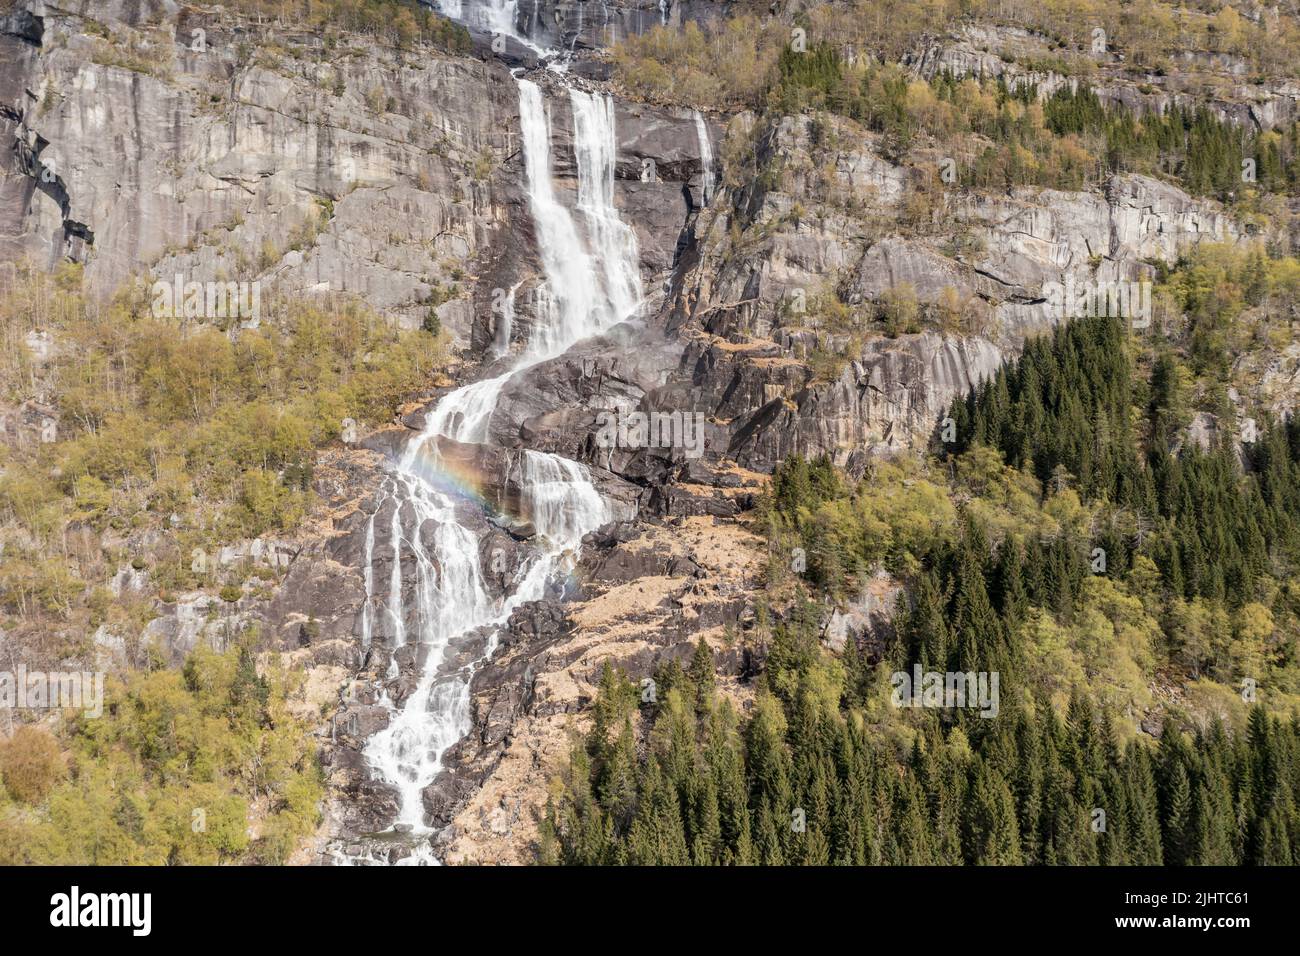 Aerial view of waterfall Tjornadalsfossen, south of Odda, Rogaland, Norway Stock Photo